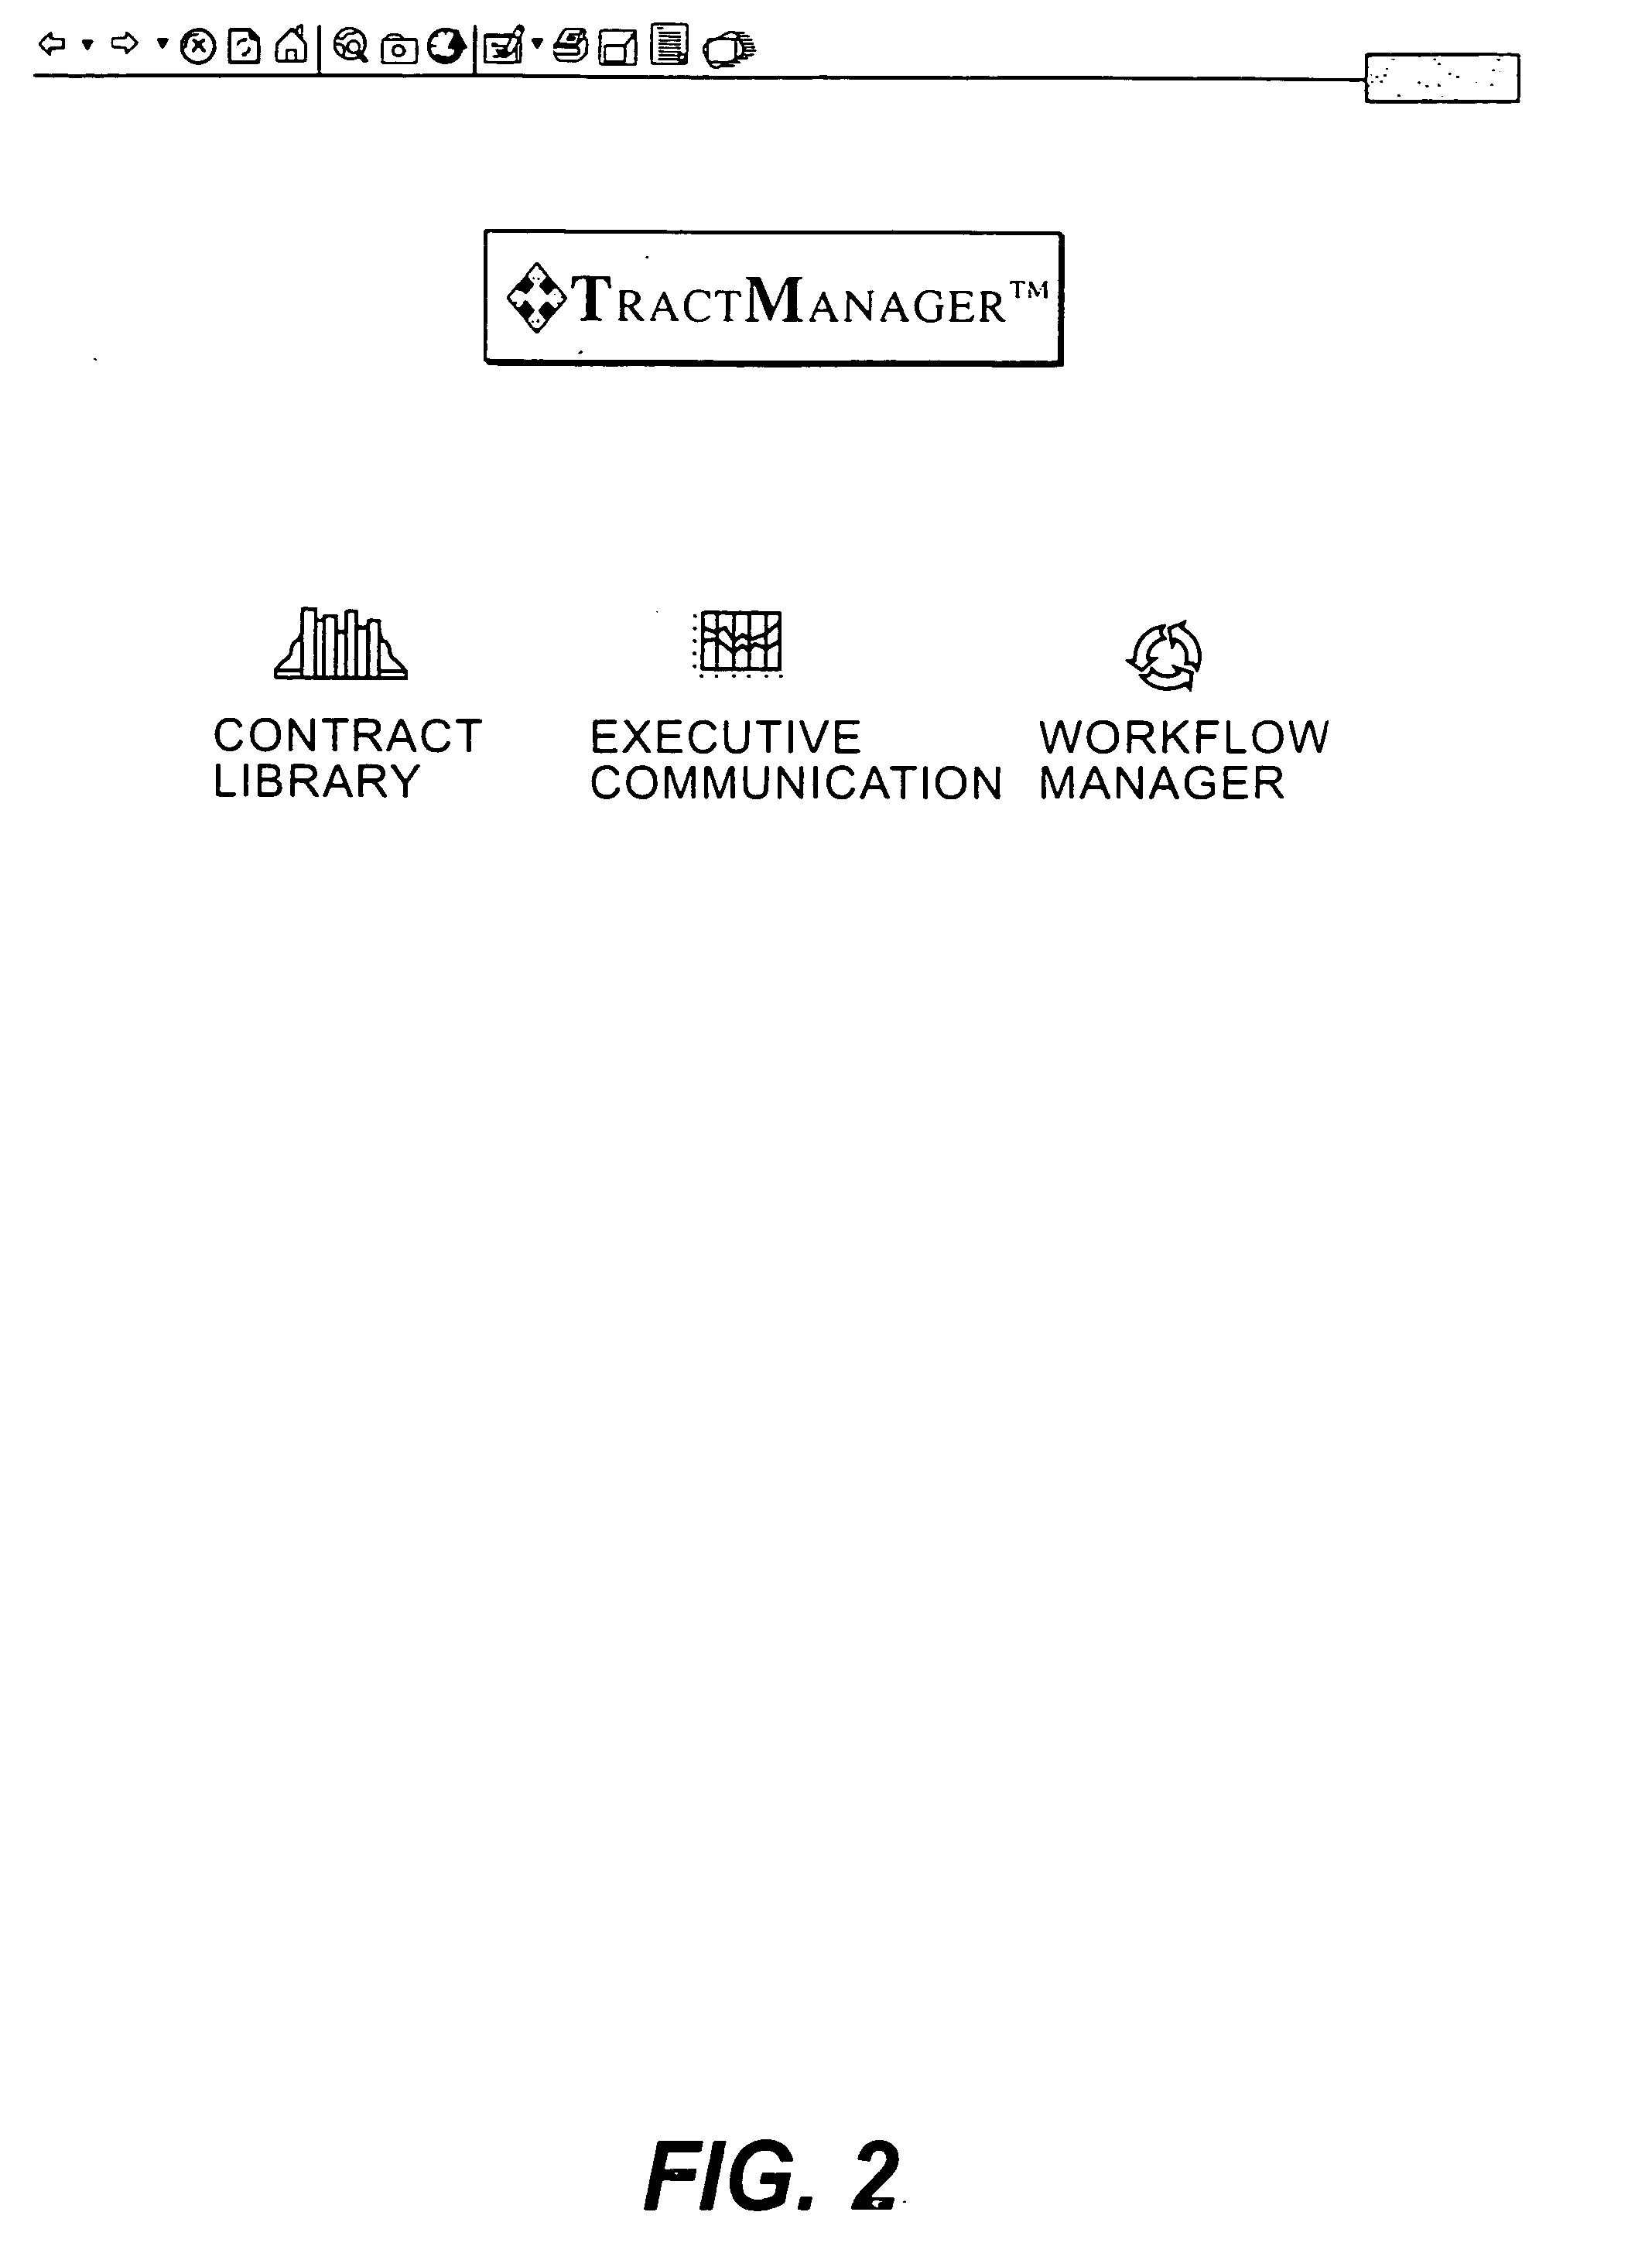 Method and system to convert paper documents to electronic documents and manage the electronic documents